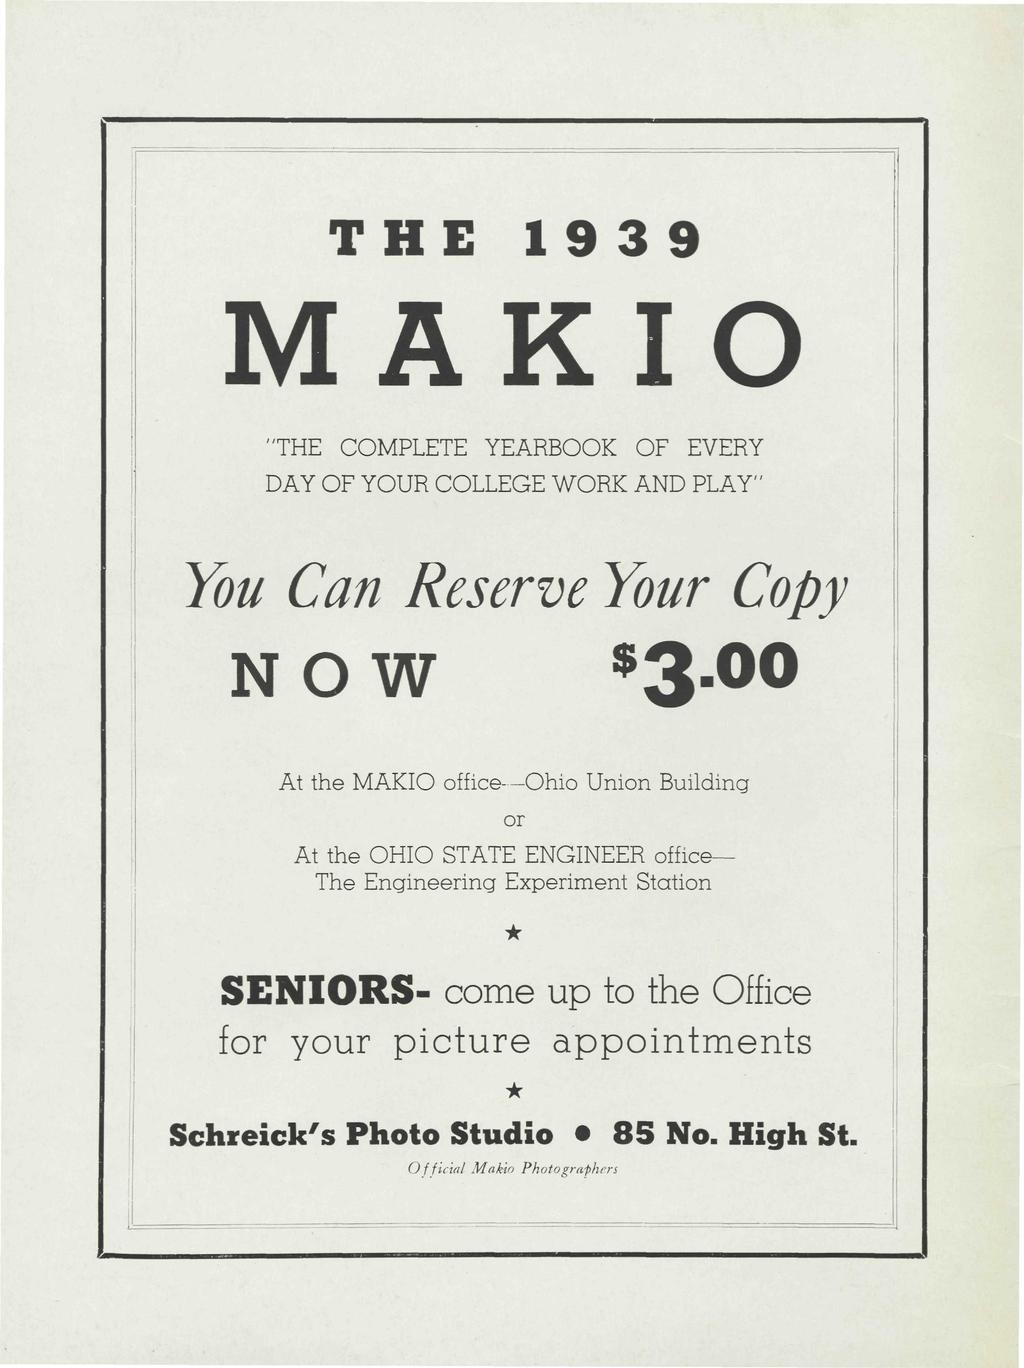 THE 1939 MAKIO "THE COMPLETE YEARBOOK OF EVERY DAY OF YOUR COLLEGE WORK AND PLAY" You Can Reserve Your Copy NOW $3.